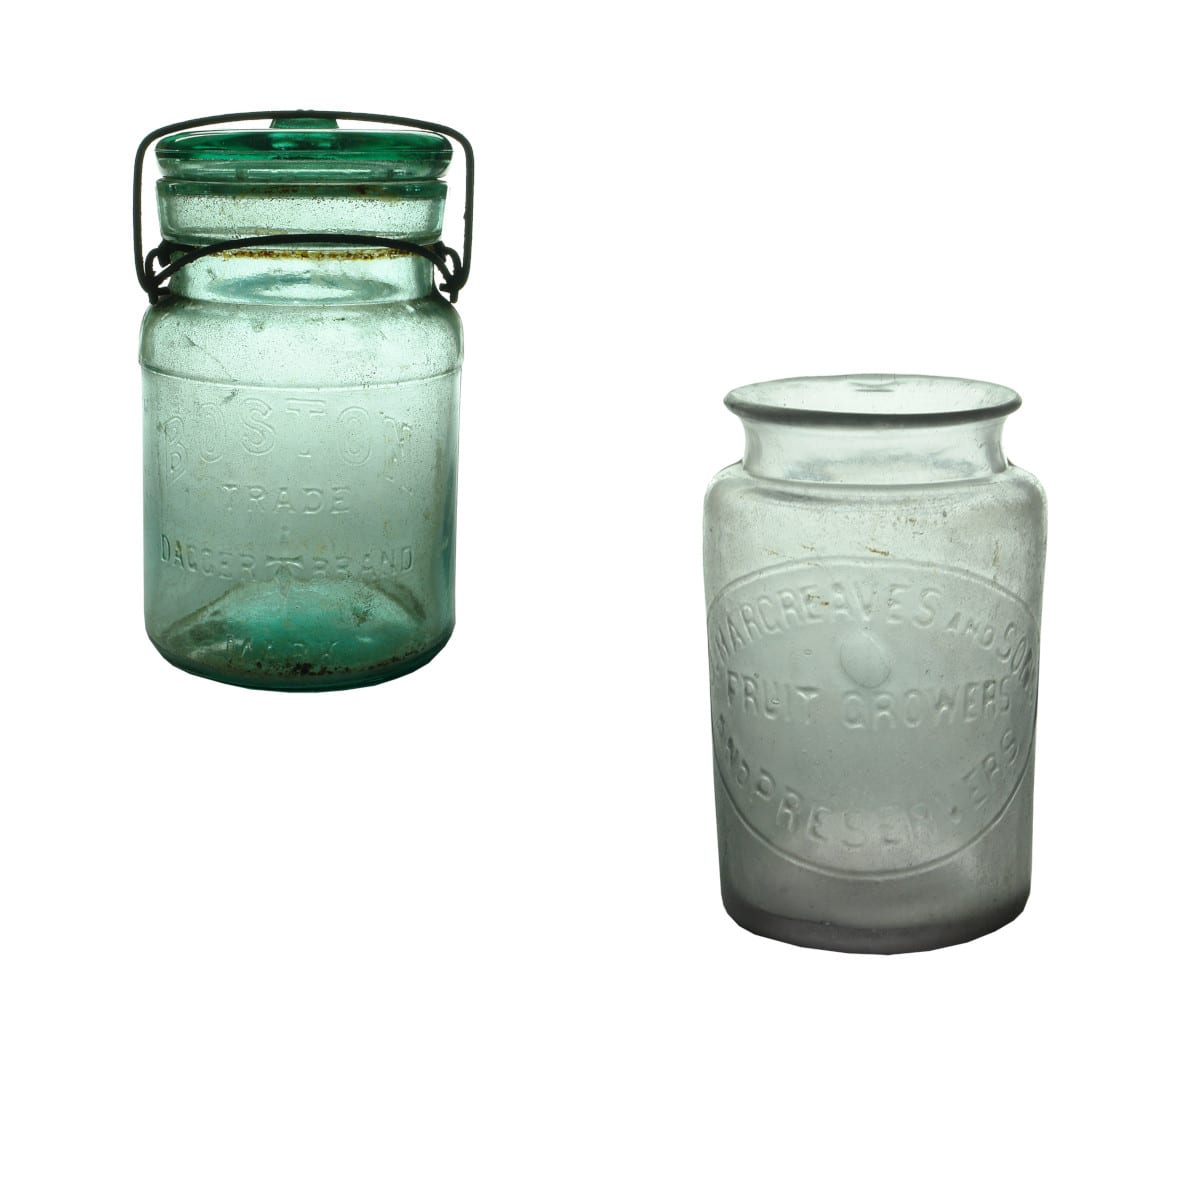 2 Items. Fruit Jar & Jam Jar. Boston Dagger Brand and Hargreaves and Sons.